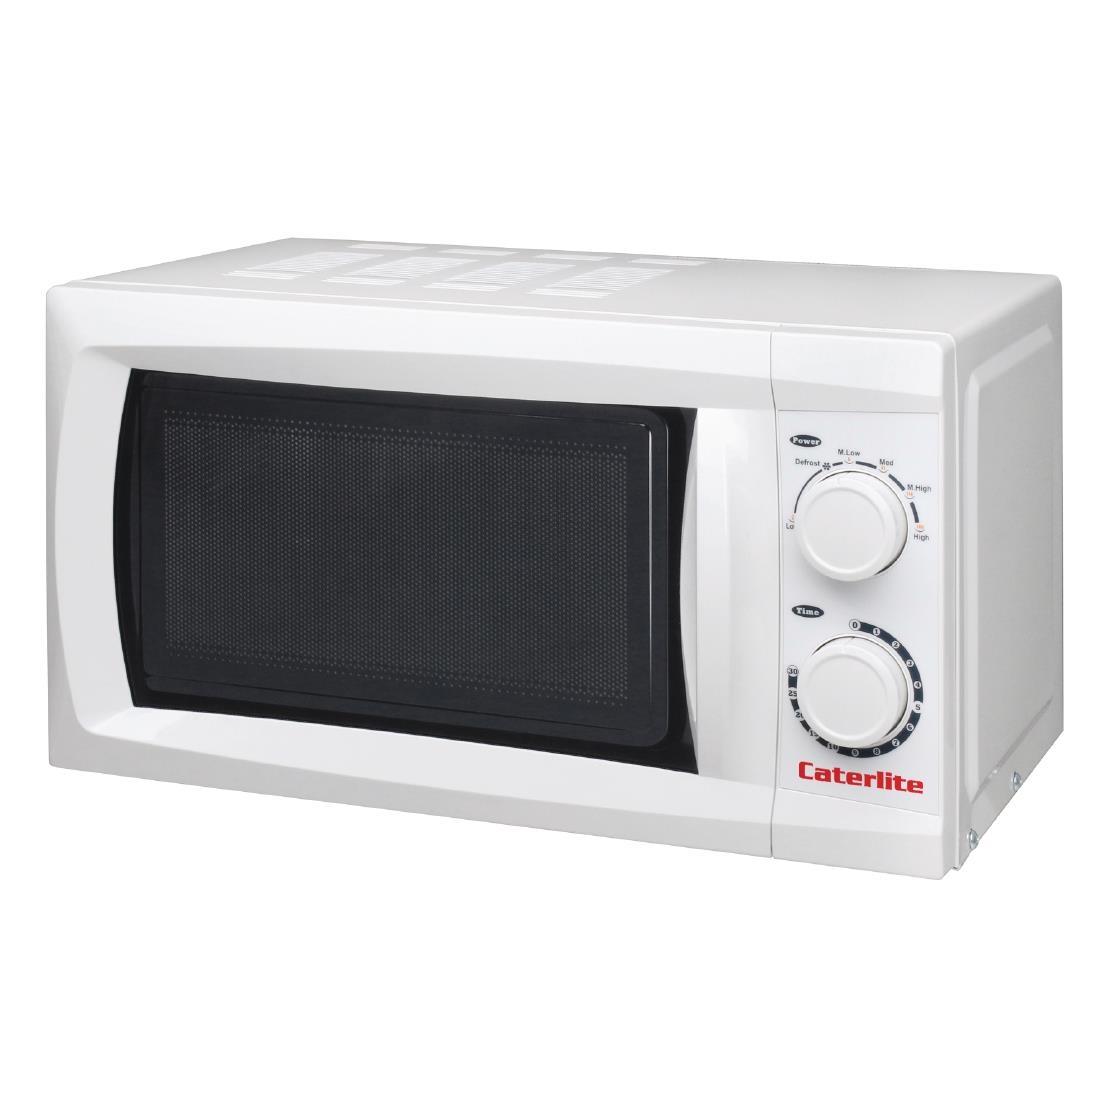 Caterlite Compact Microwave 17ltr 700W - CN180  - 6